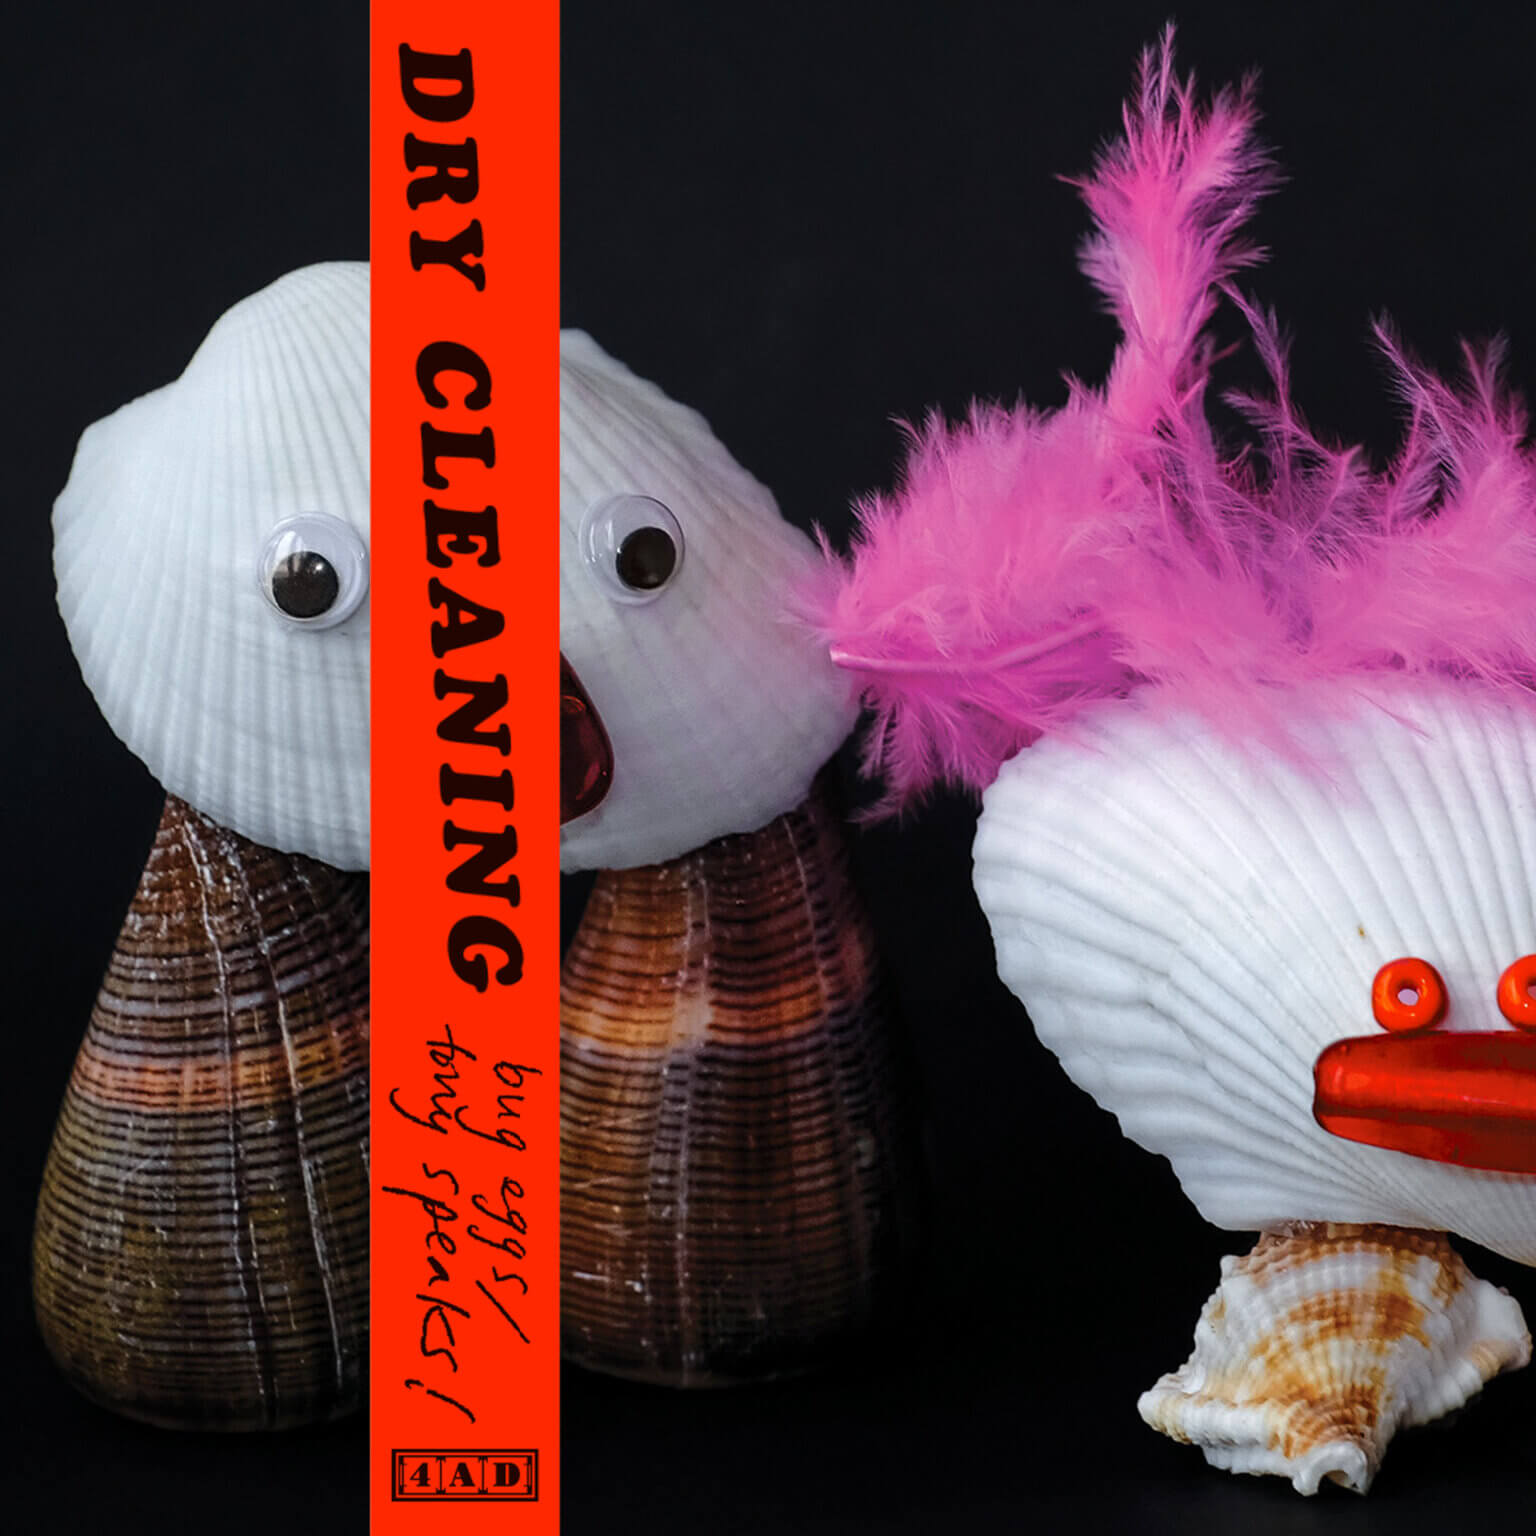 Dry Cleaning has shared a one-off double A-side single, “Bug Eggs” b/w “Tony Speaks!” The album was recorded at Rockfield Studios